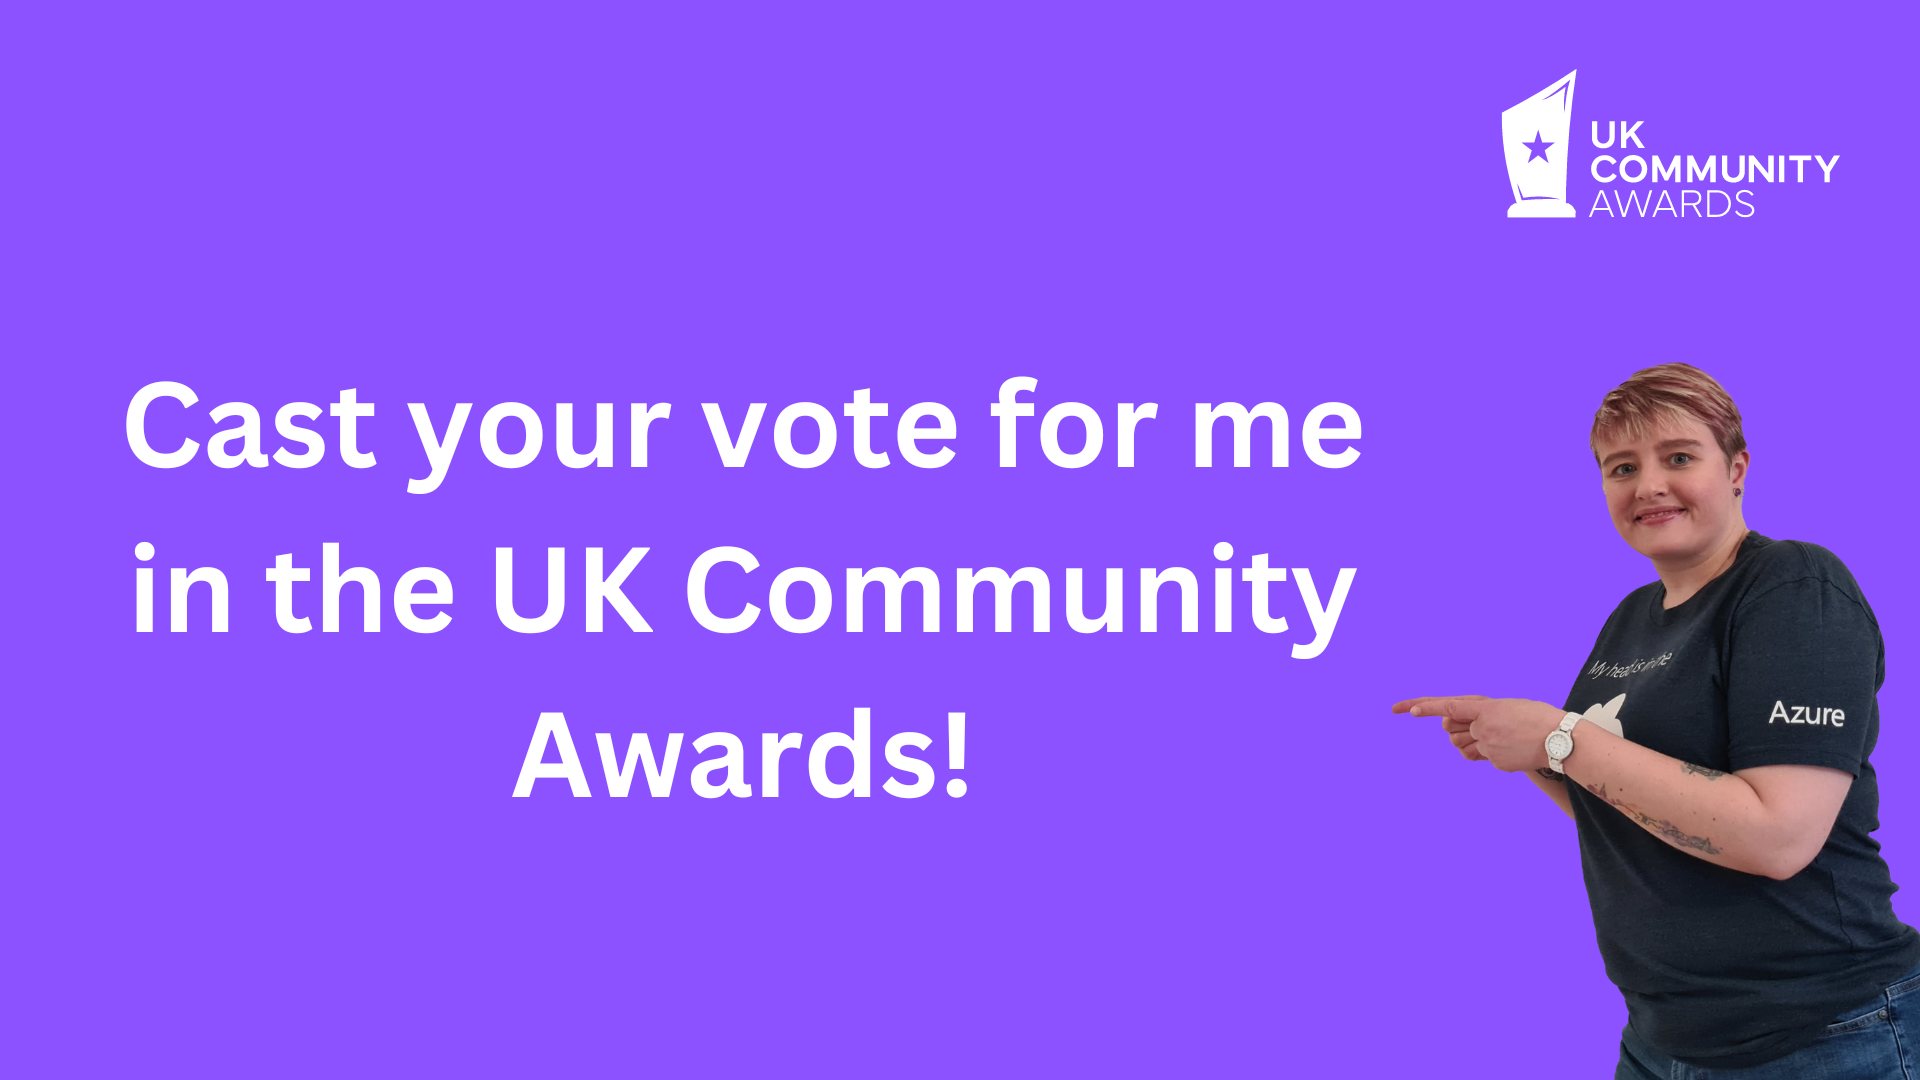 Cast your vote for me in the UK Community Awards!